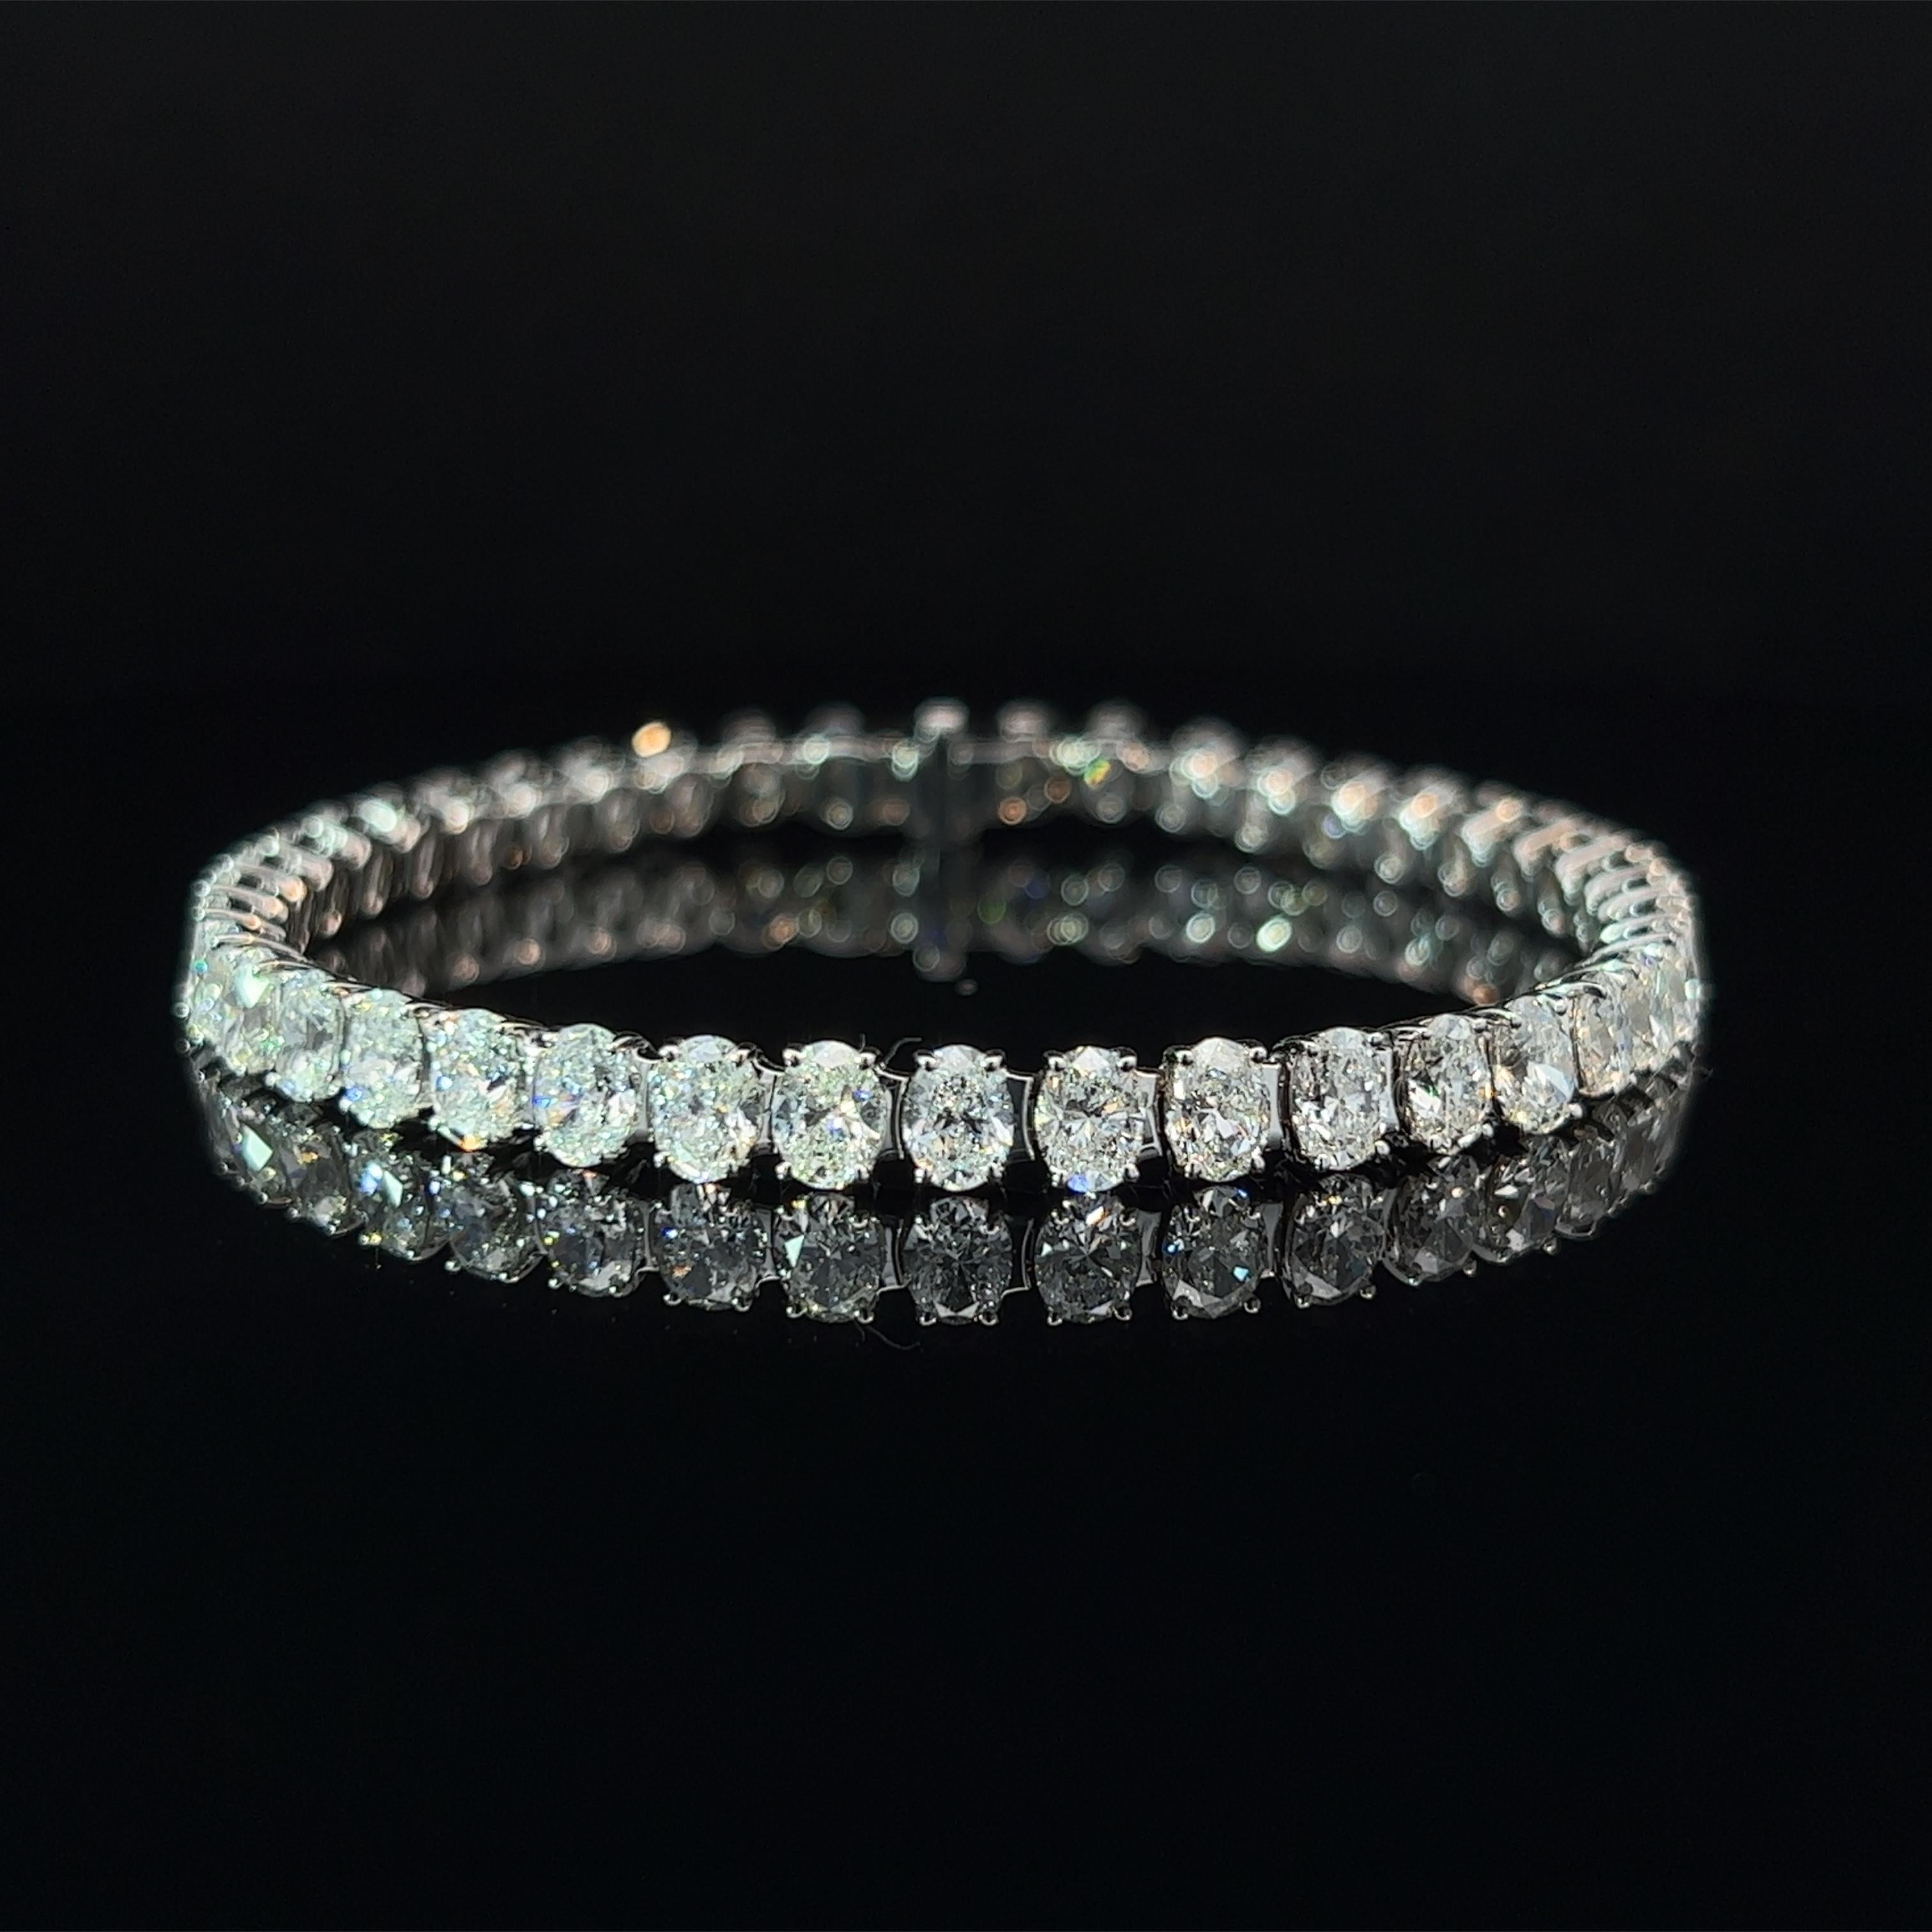 Diamond Shape: Oval Cut 
Total Diamond Weight: 12.9ct
Individual Diamond Weight: .33ct
Color/Clarity: FG VVS  
Metal: 18K White Gold  
Metal Weight: 14.96g 

Key Features:

Oval-Cut Diamonds: The centerpiece of this bracelet features a dazzling